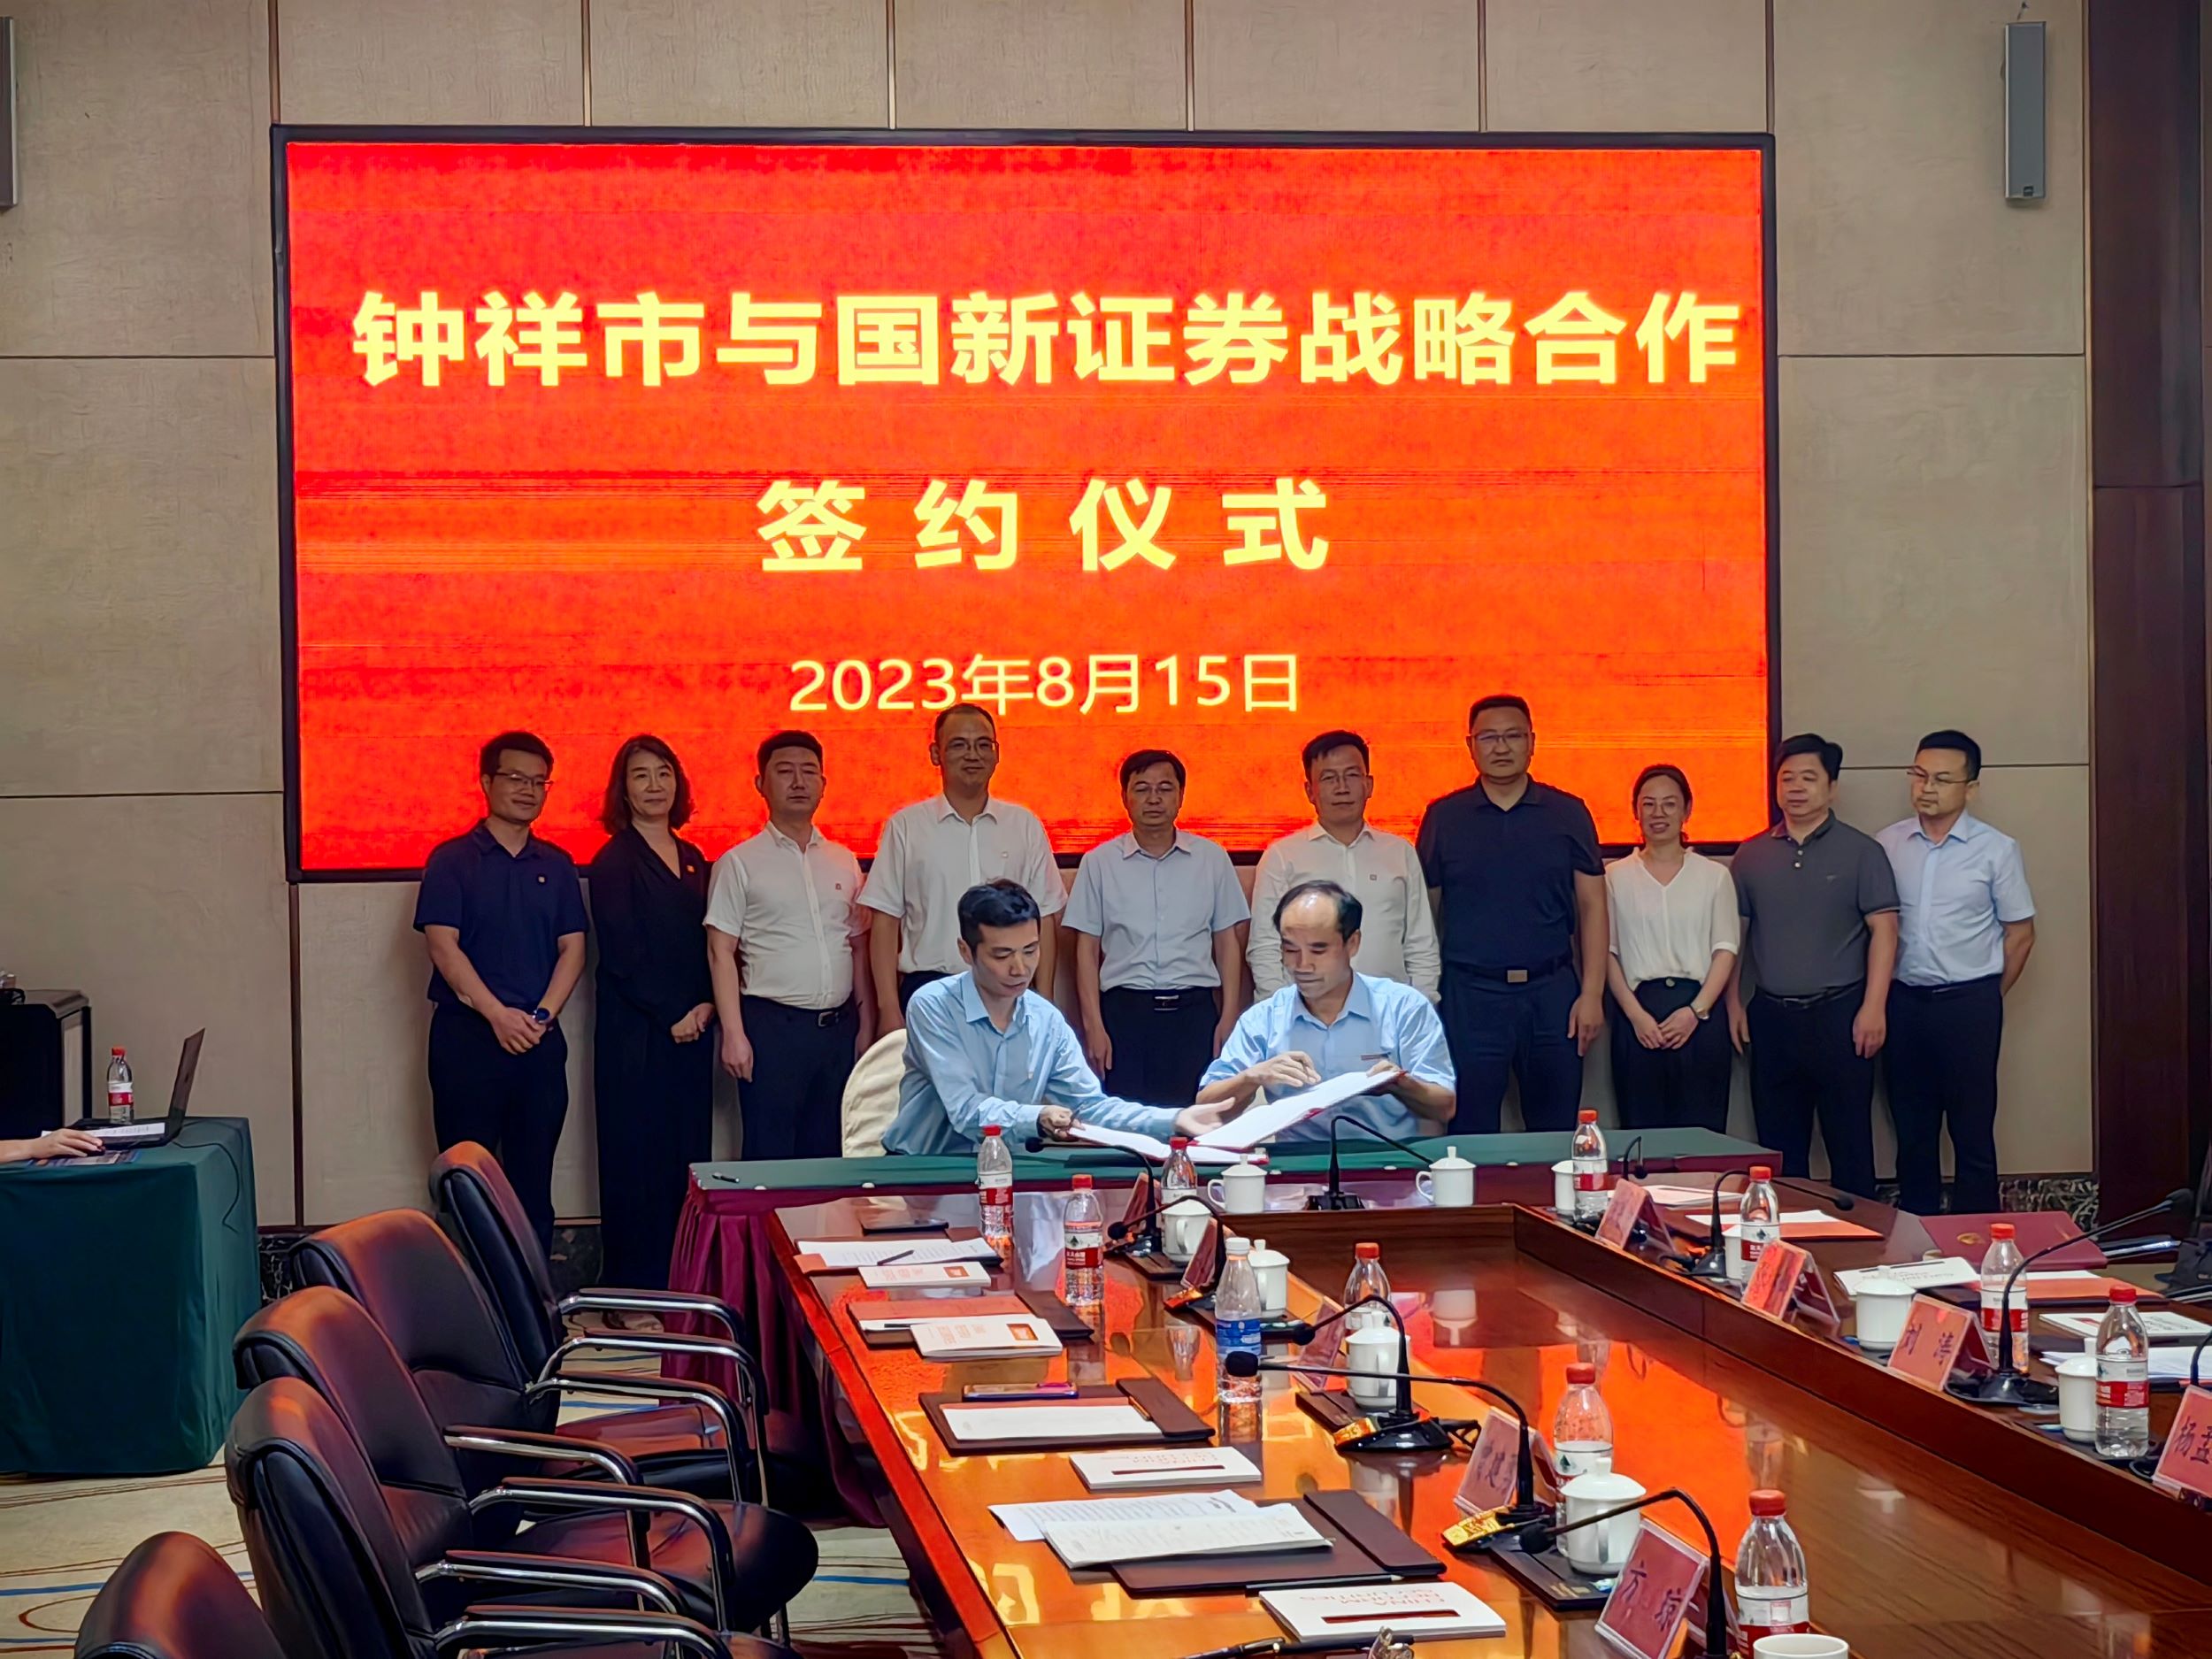 XSL and Guoxin Securities Attend the Signing Ceremony with Zhongxiang Municipal Government